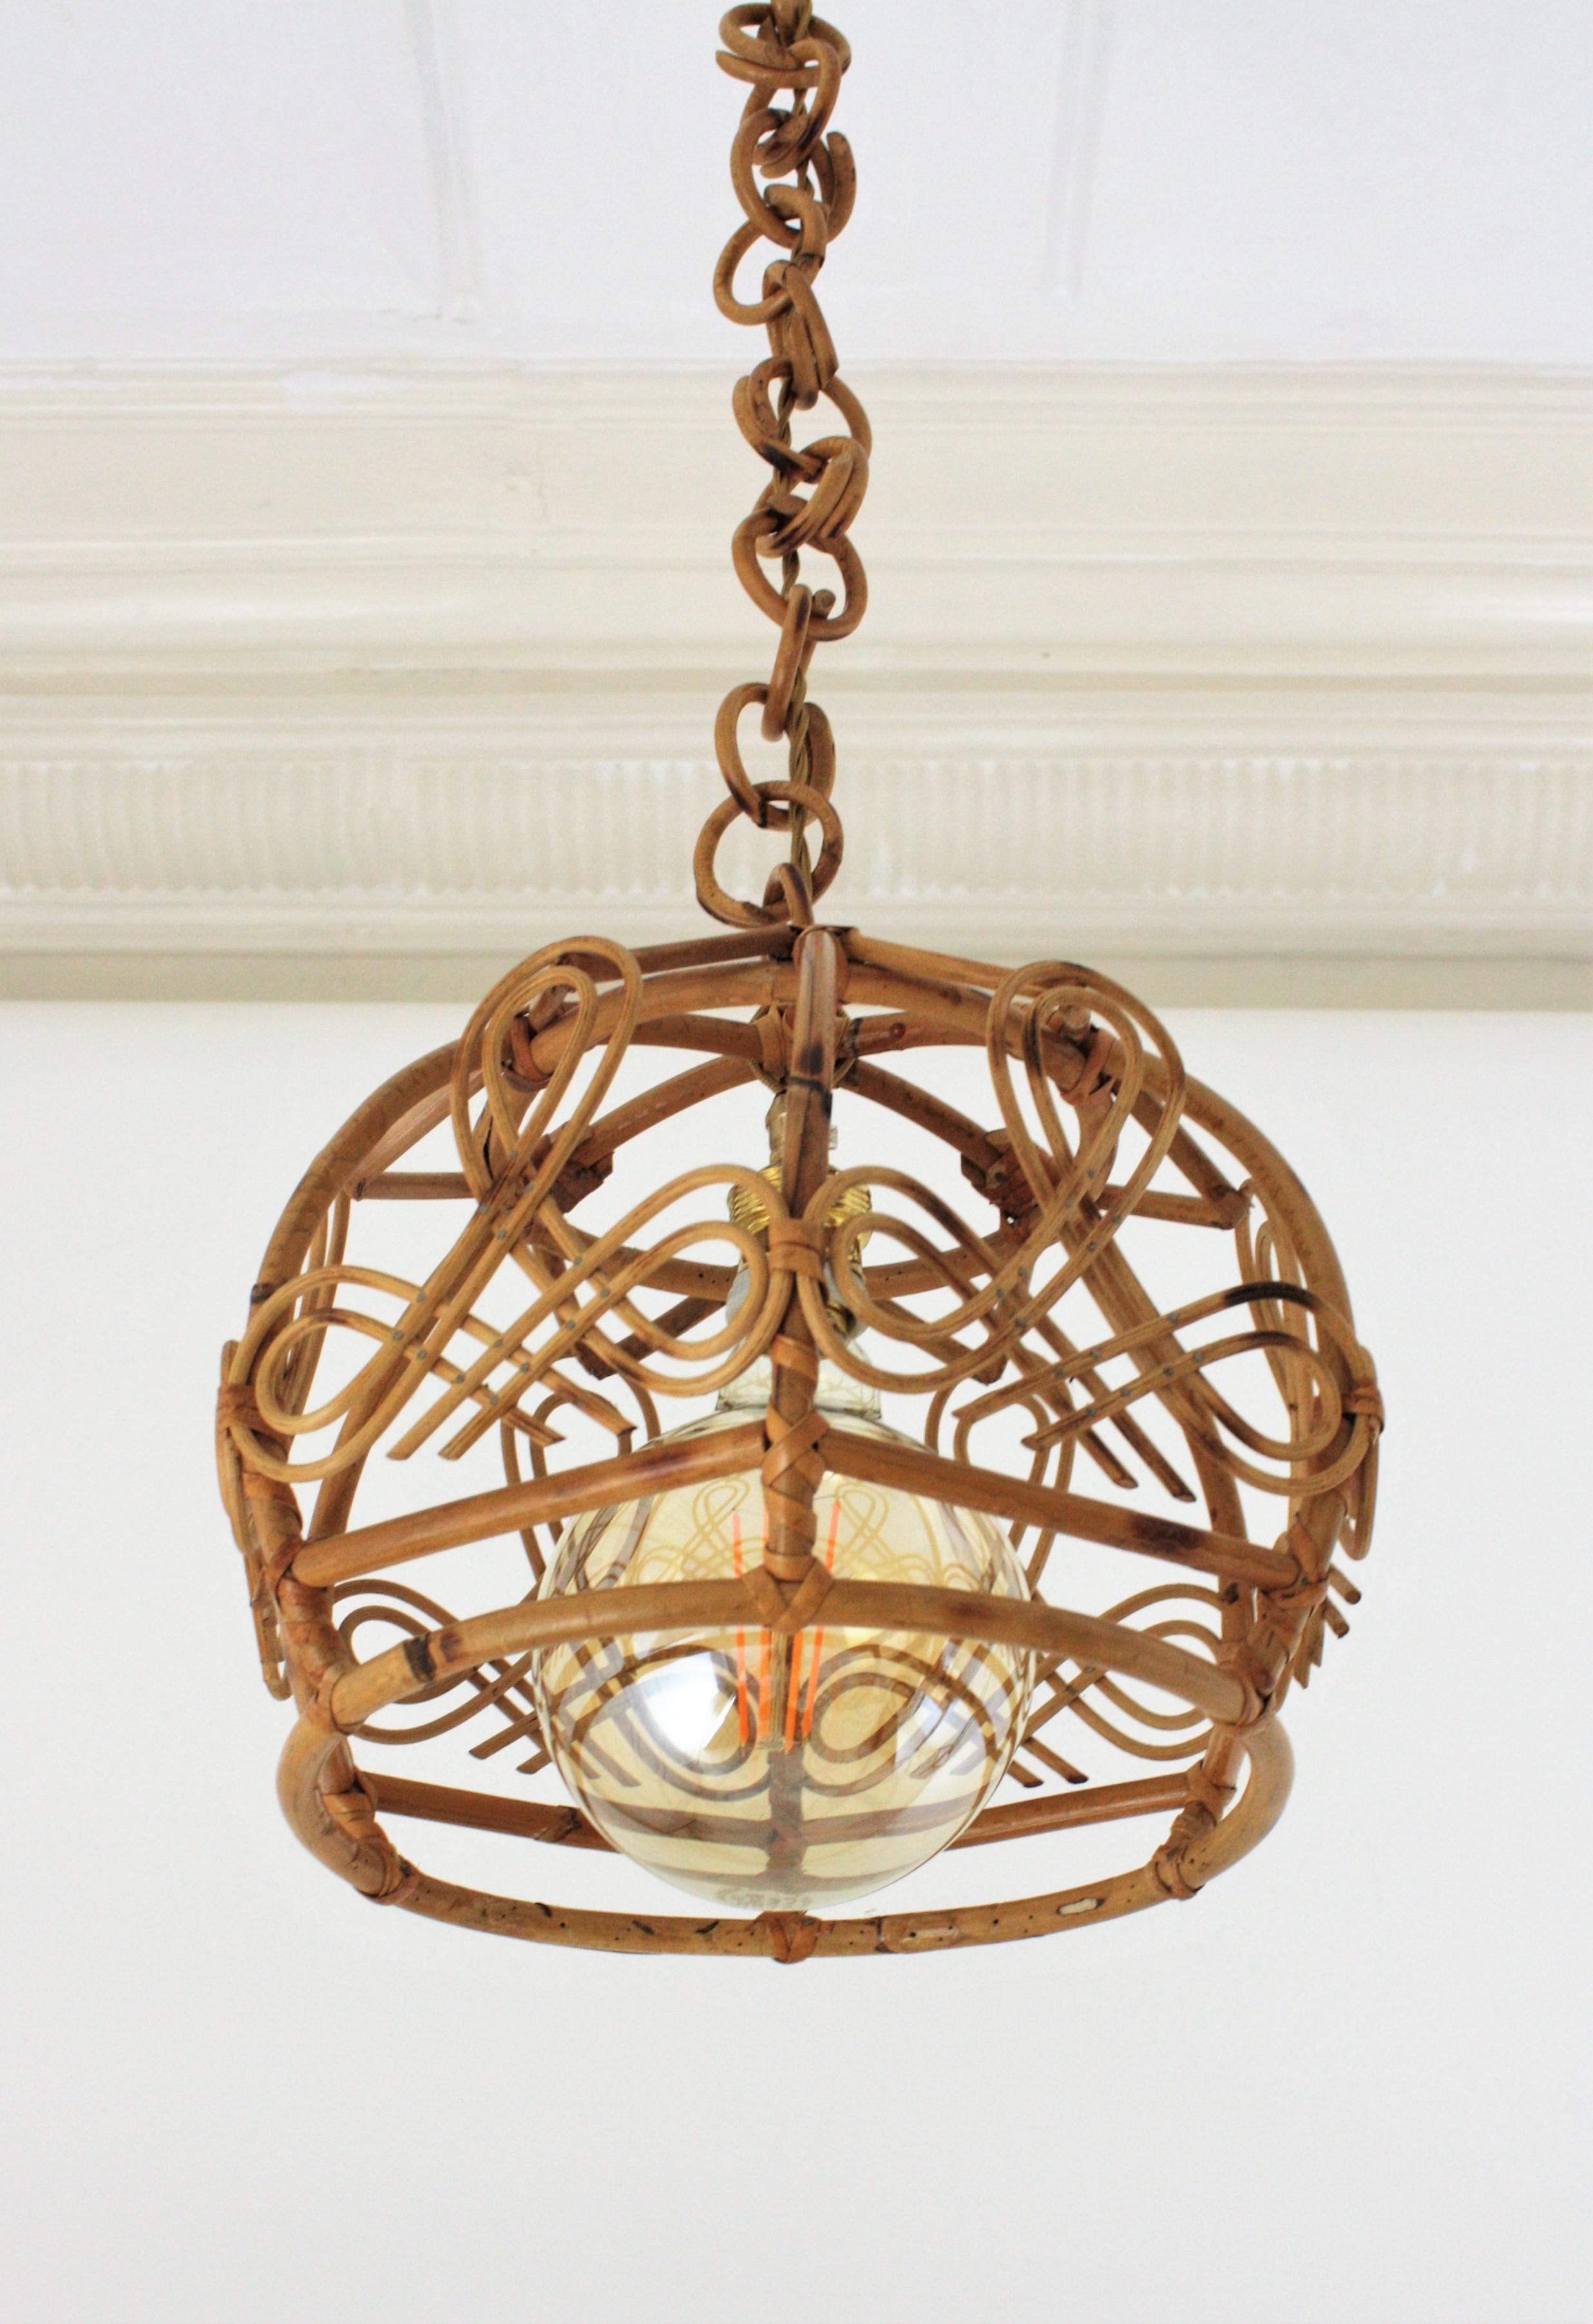 Mid-Century Modern bamboo and rattan bell shaped pendant or lantern accented by Oriental Details, France, 1960s.
This handcrafted ceiling lamp features a bamboo bell shaped shade with chinoiserie decorations hanging from a chain with round rattan /